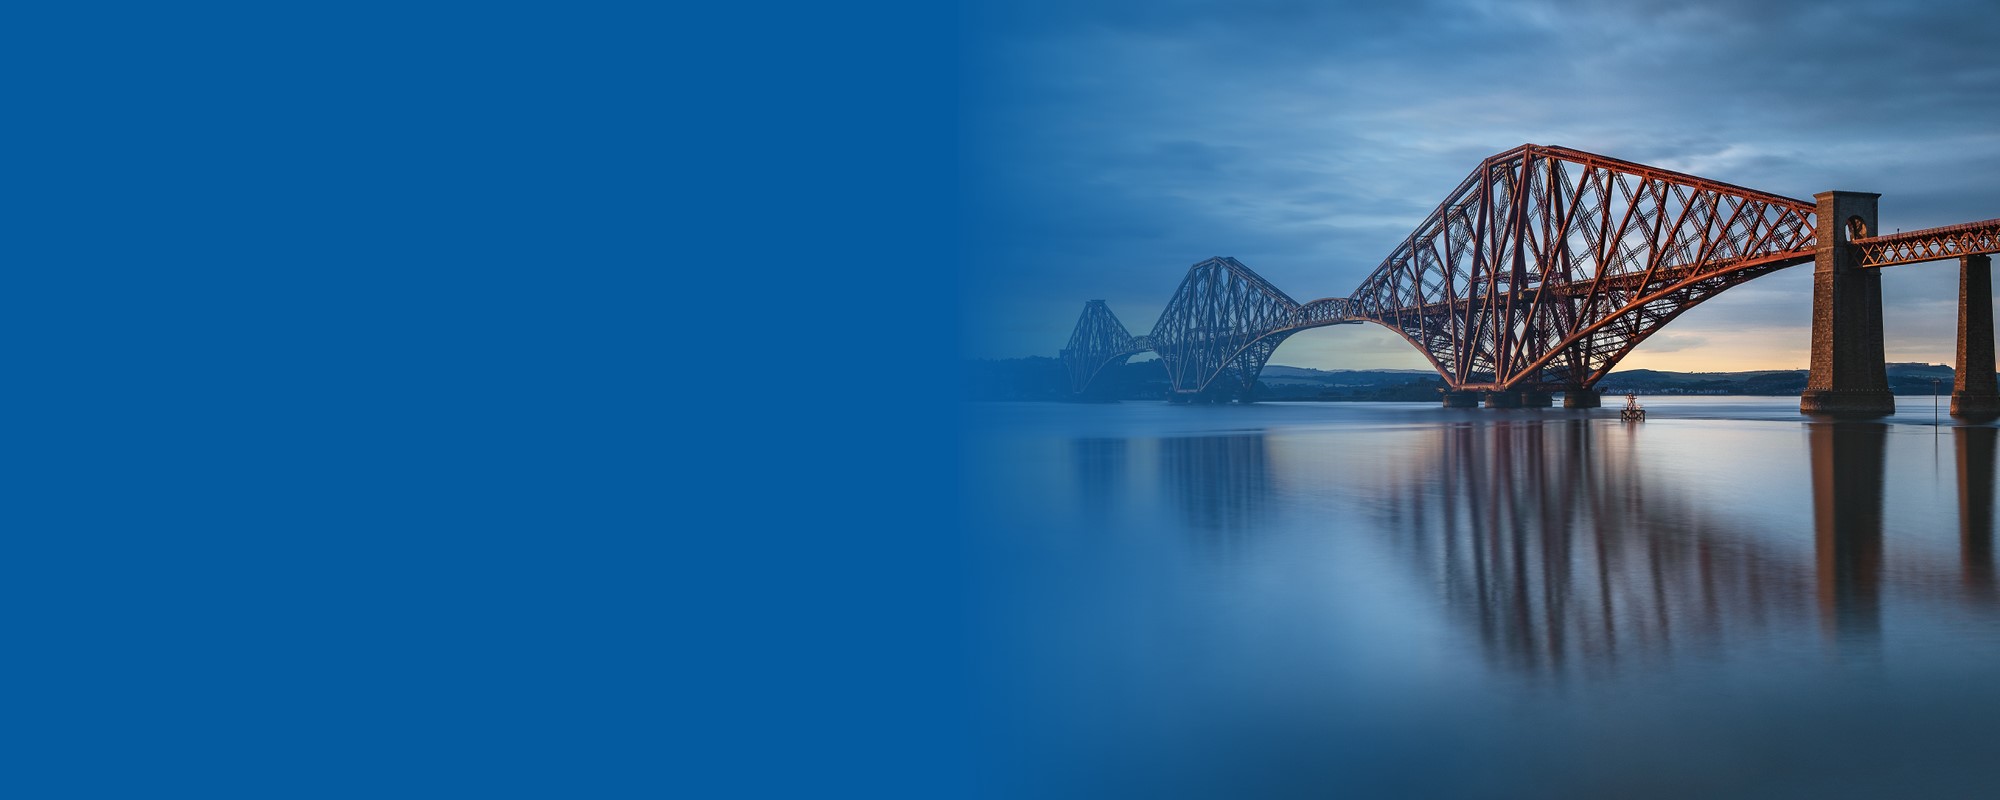 A image of the dark red Forth Rail bridge, with the river below and a blue sky above. The left side of the image is a block of blue colour.